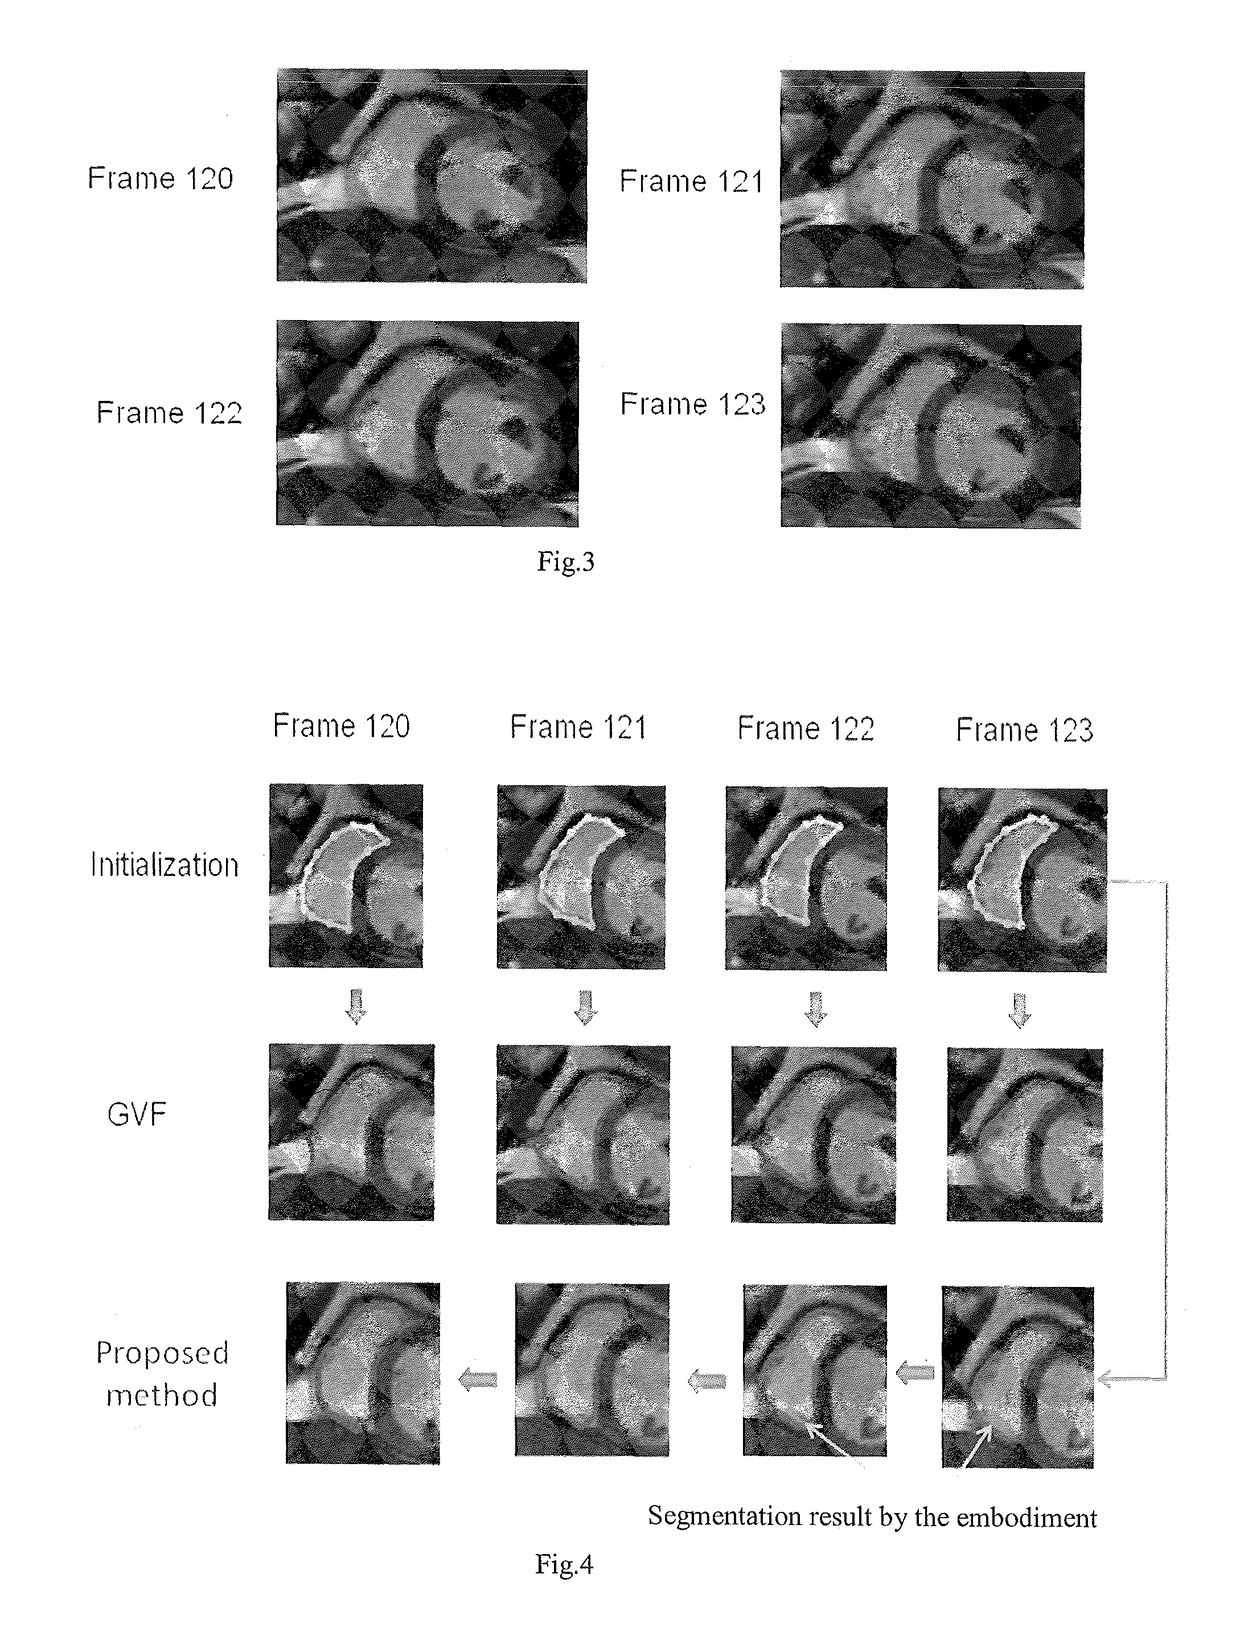 Segmentation of cardiac magnetic resonance (CMR) images using a memory persistence approach